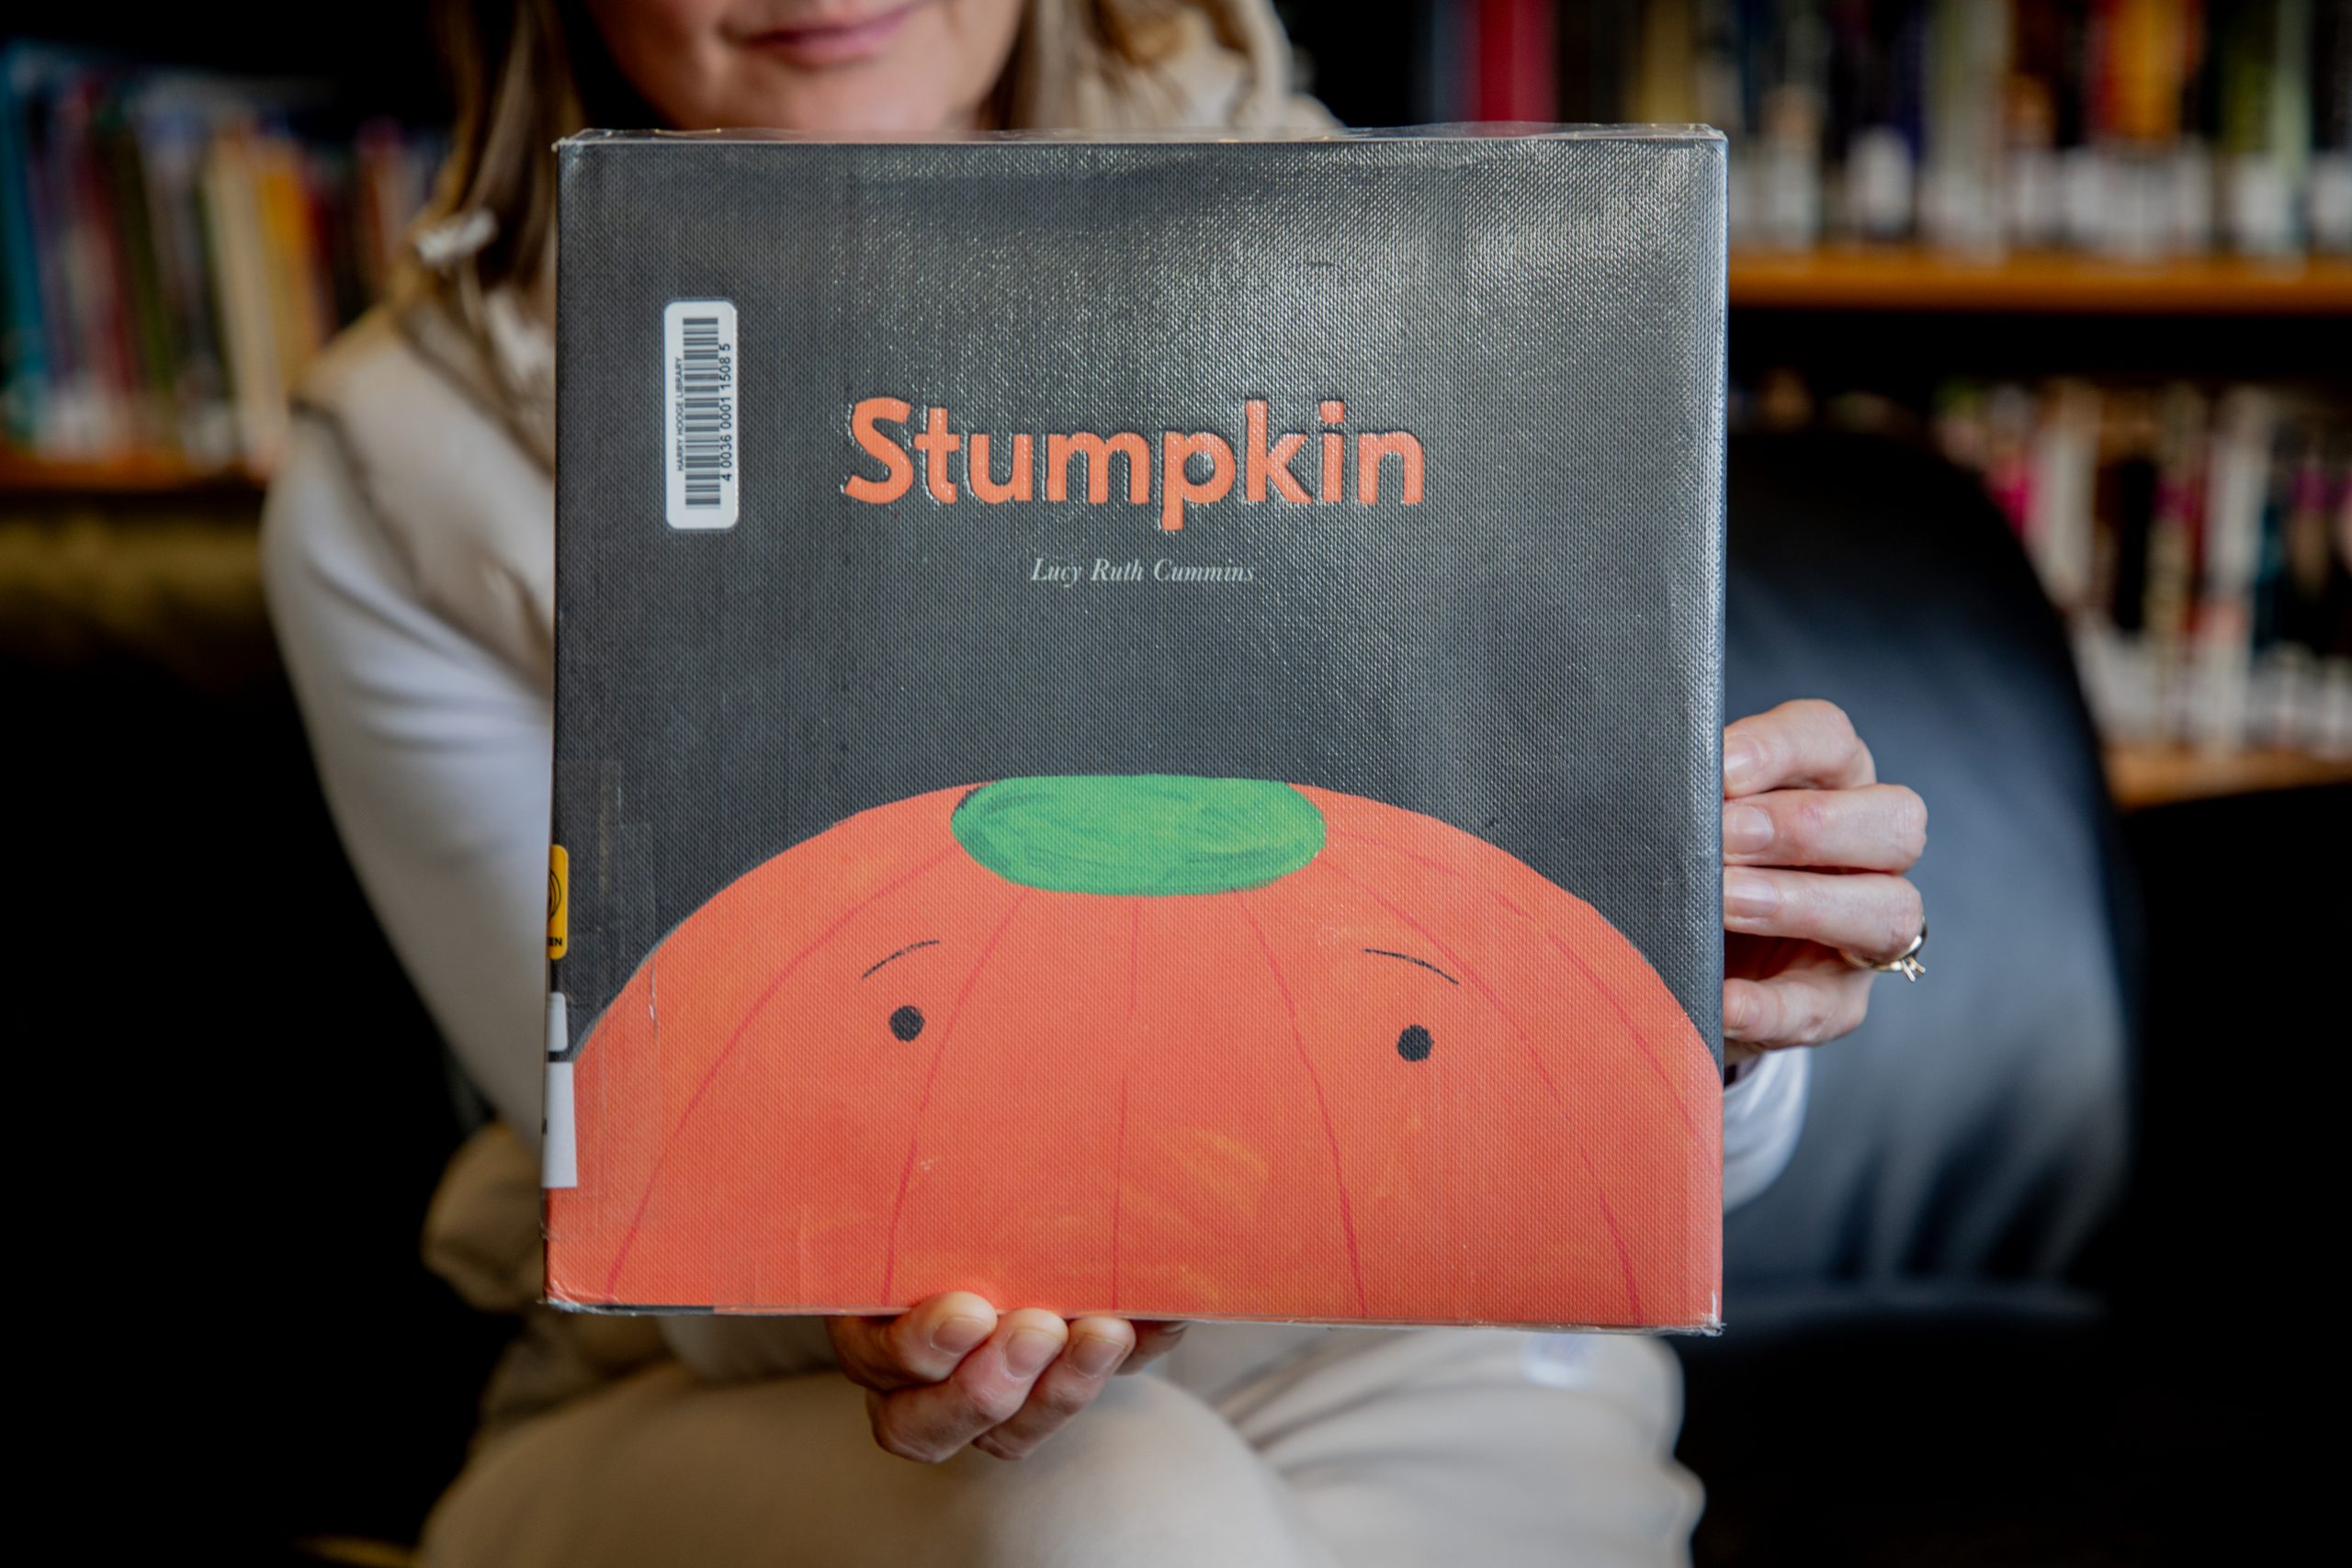 The cover of "Stumpkin" by Lucy Ruth Cummins.